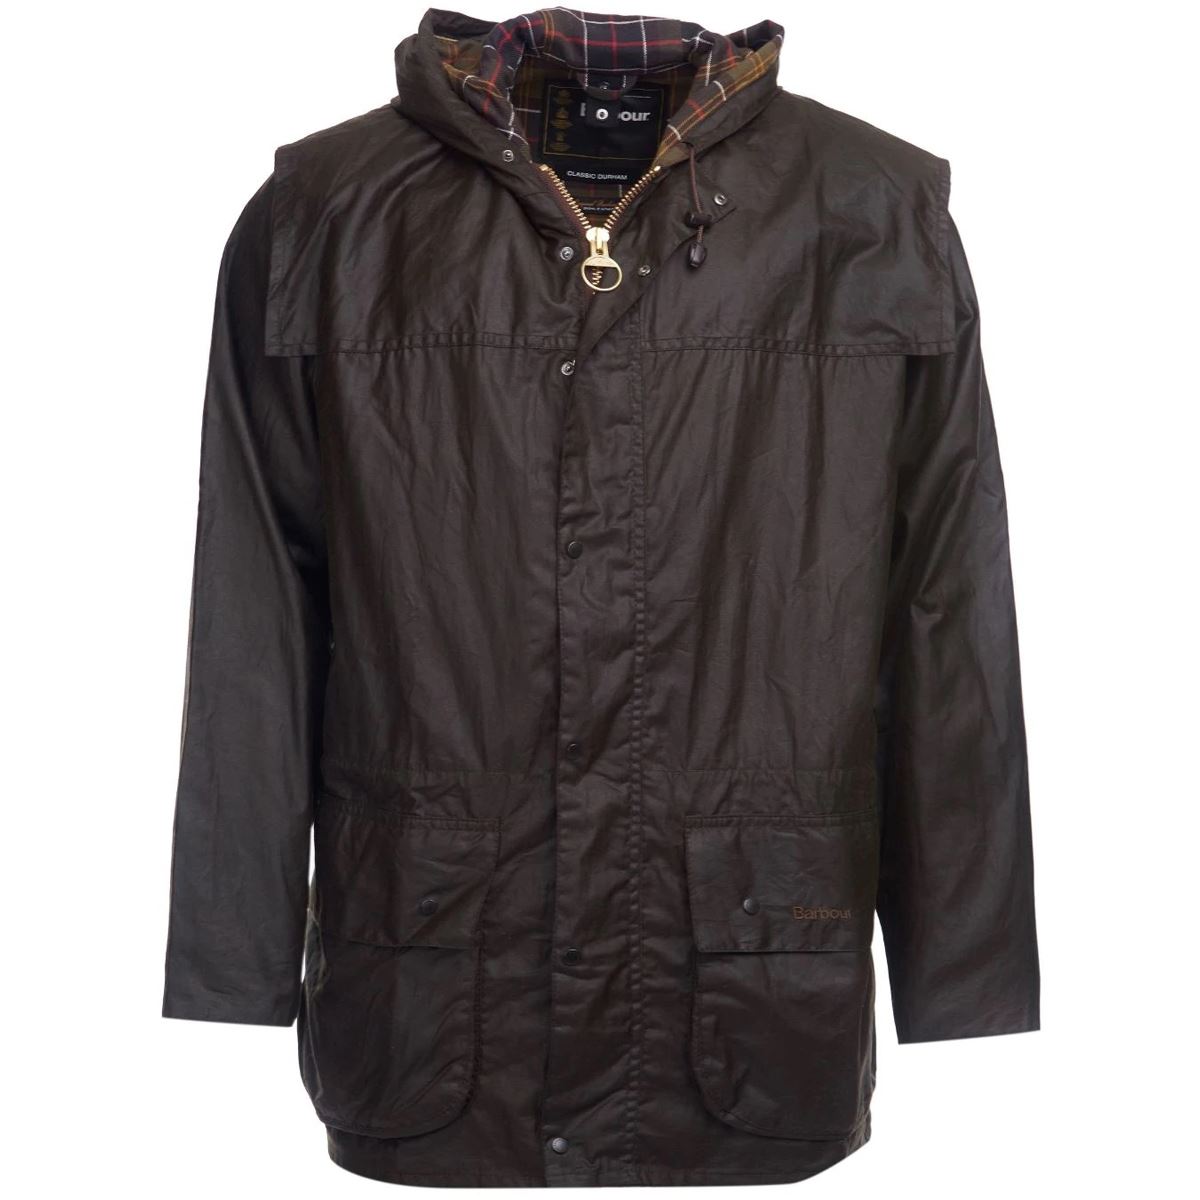 Can the Barbour Durham Jacket be adjusted for winter layering?